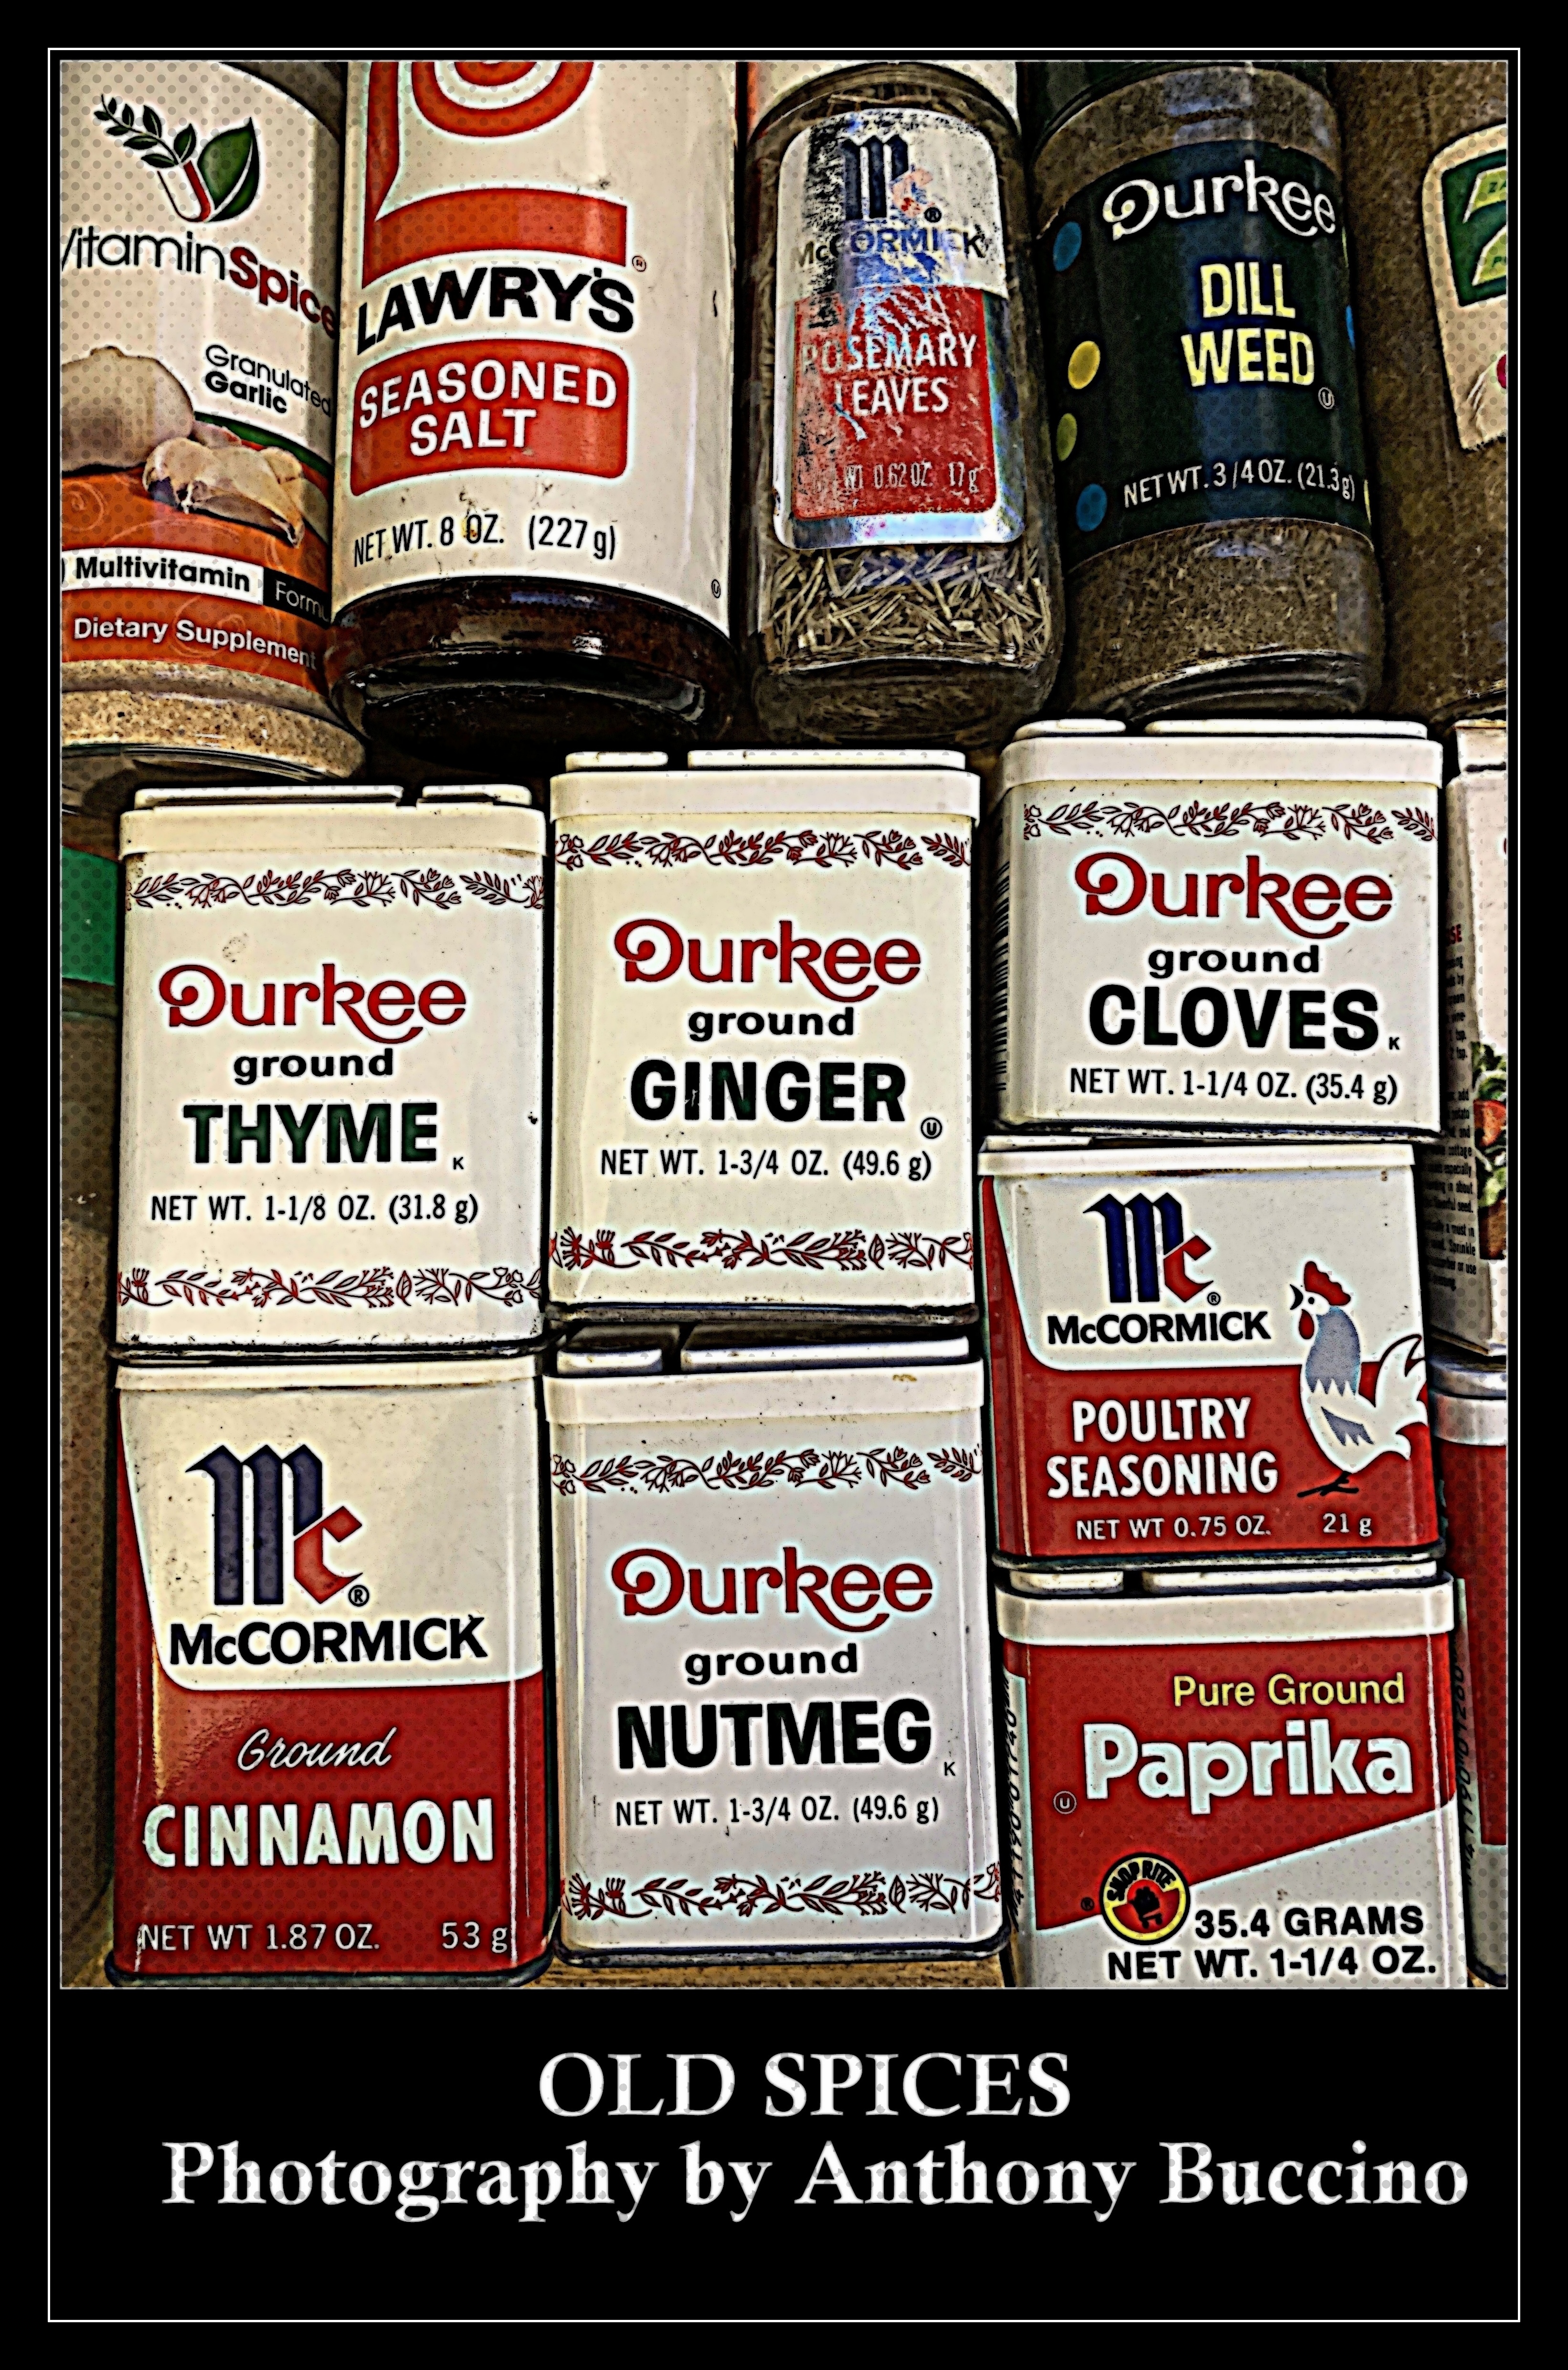 OLD SPICES Photography by Anthony Buccino